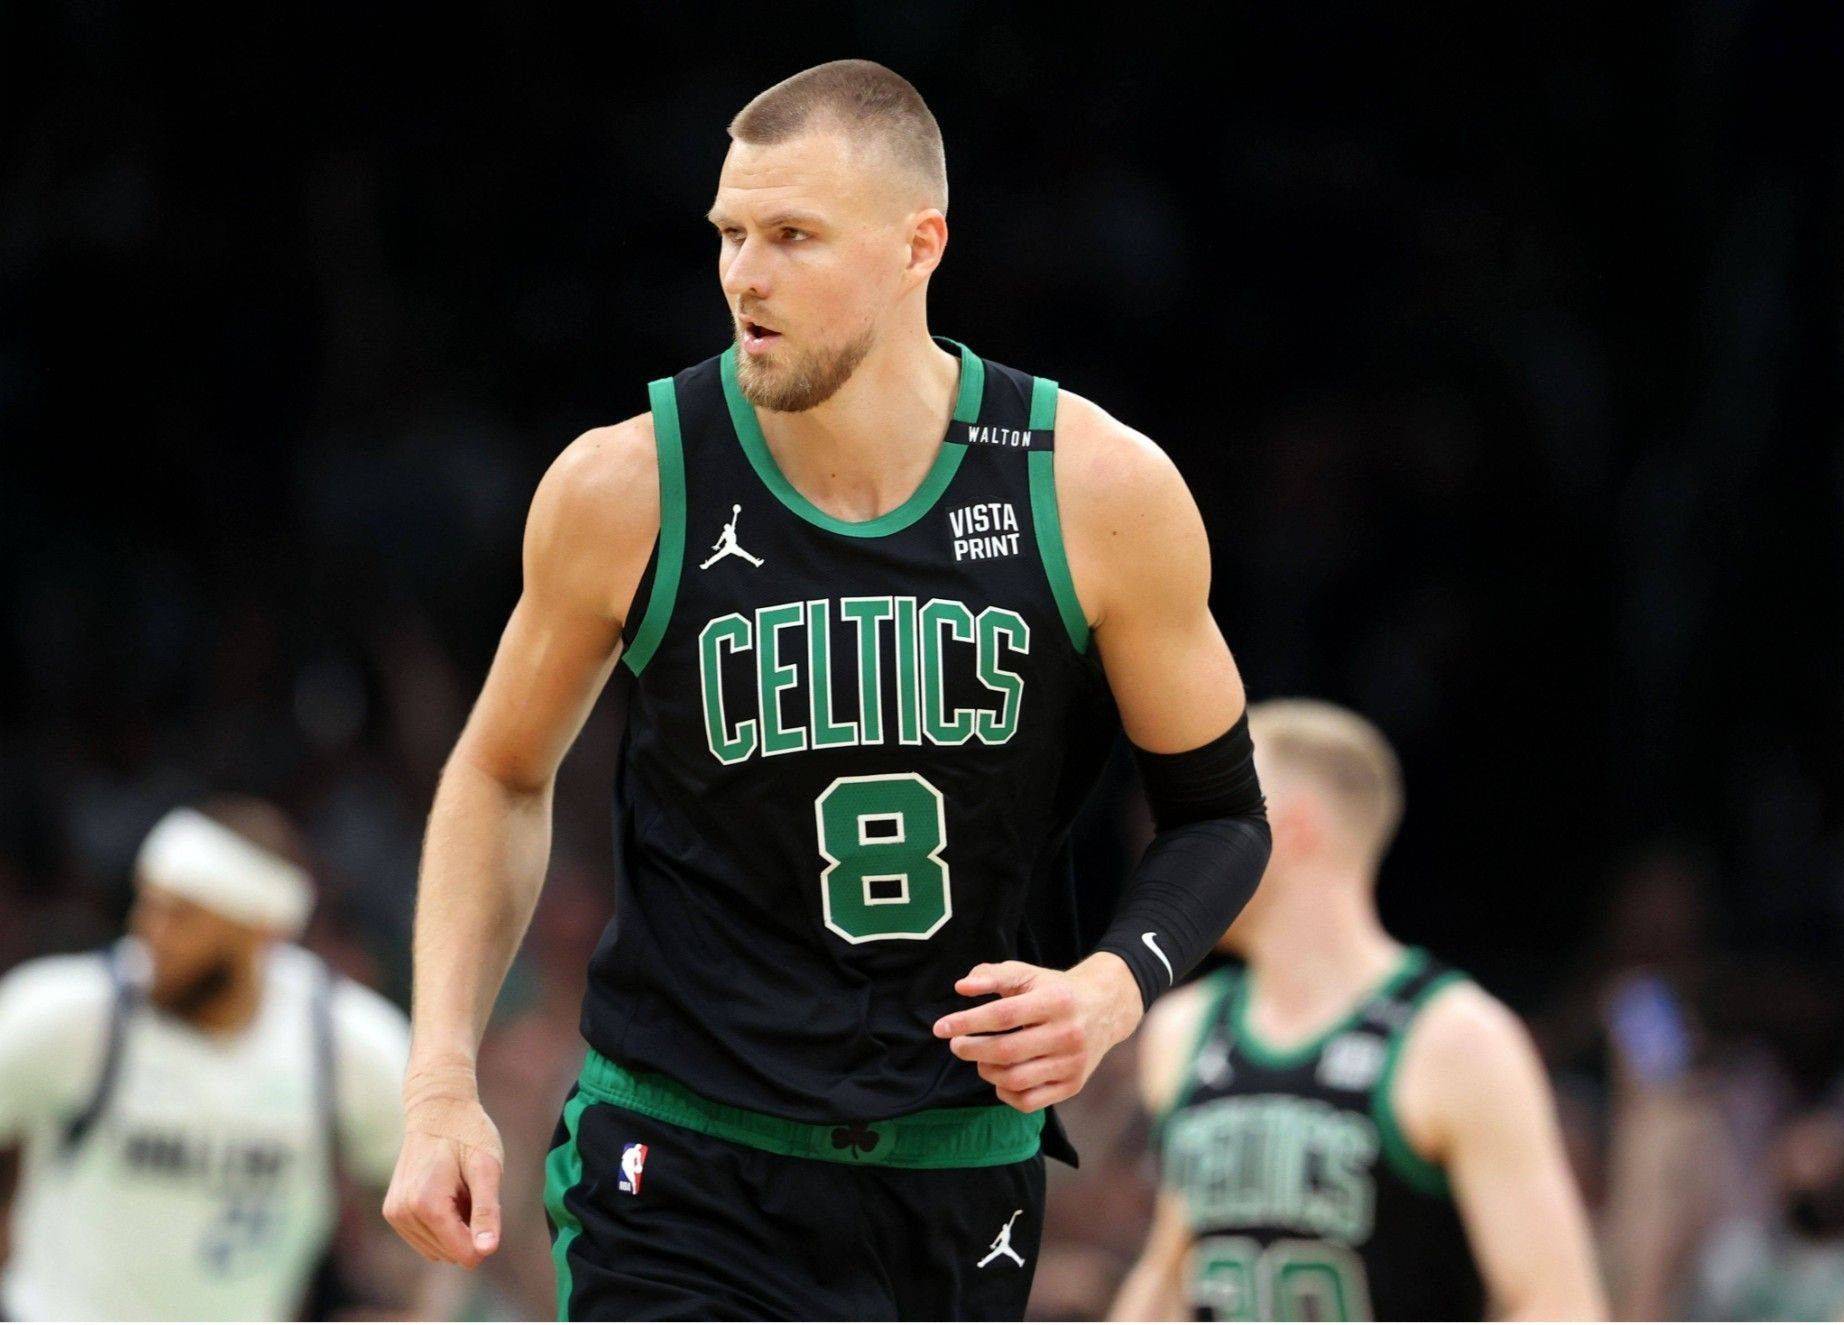 Celtics' Coach Mazzulla: Porzingis's Game 4 Status for NBA Finals to be Decided Before Tip-Off